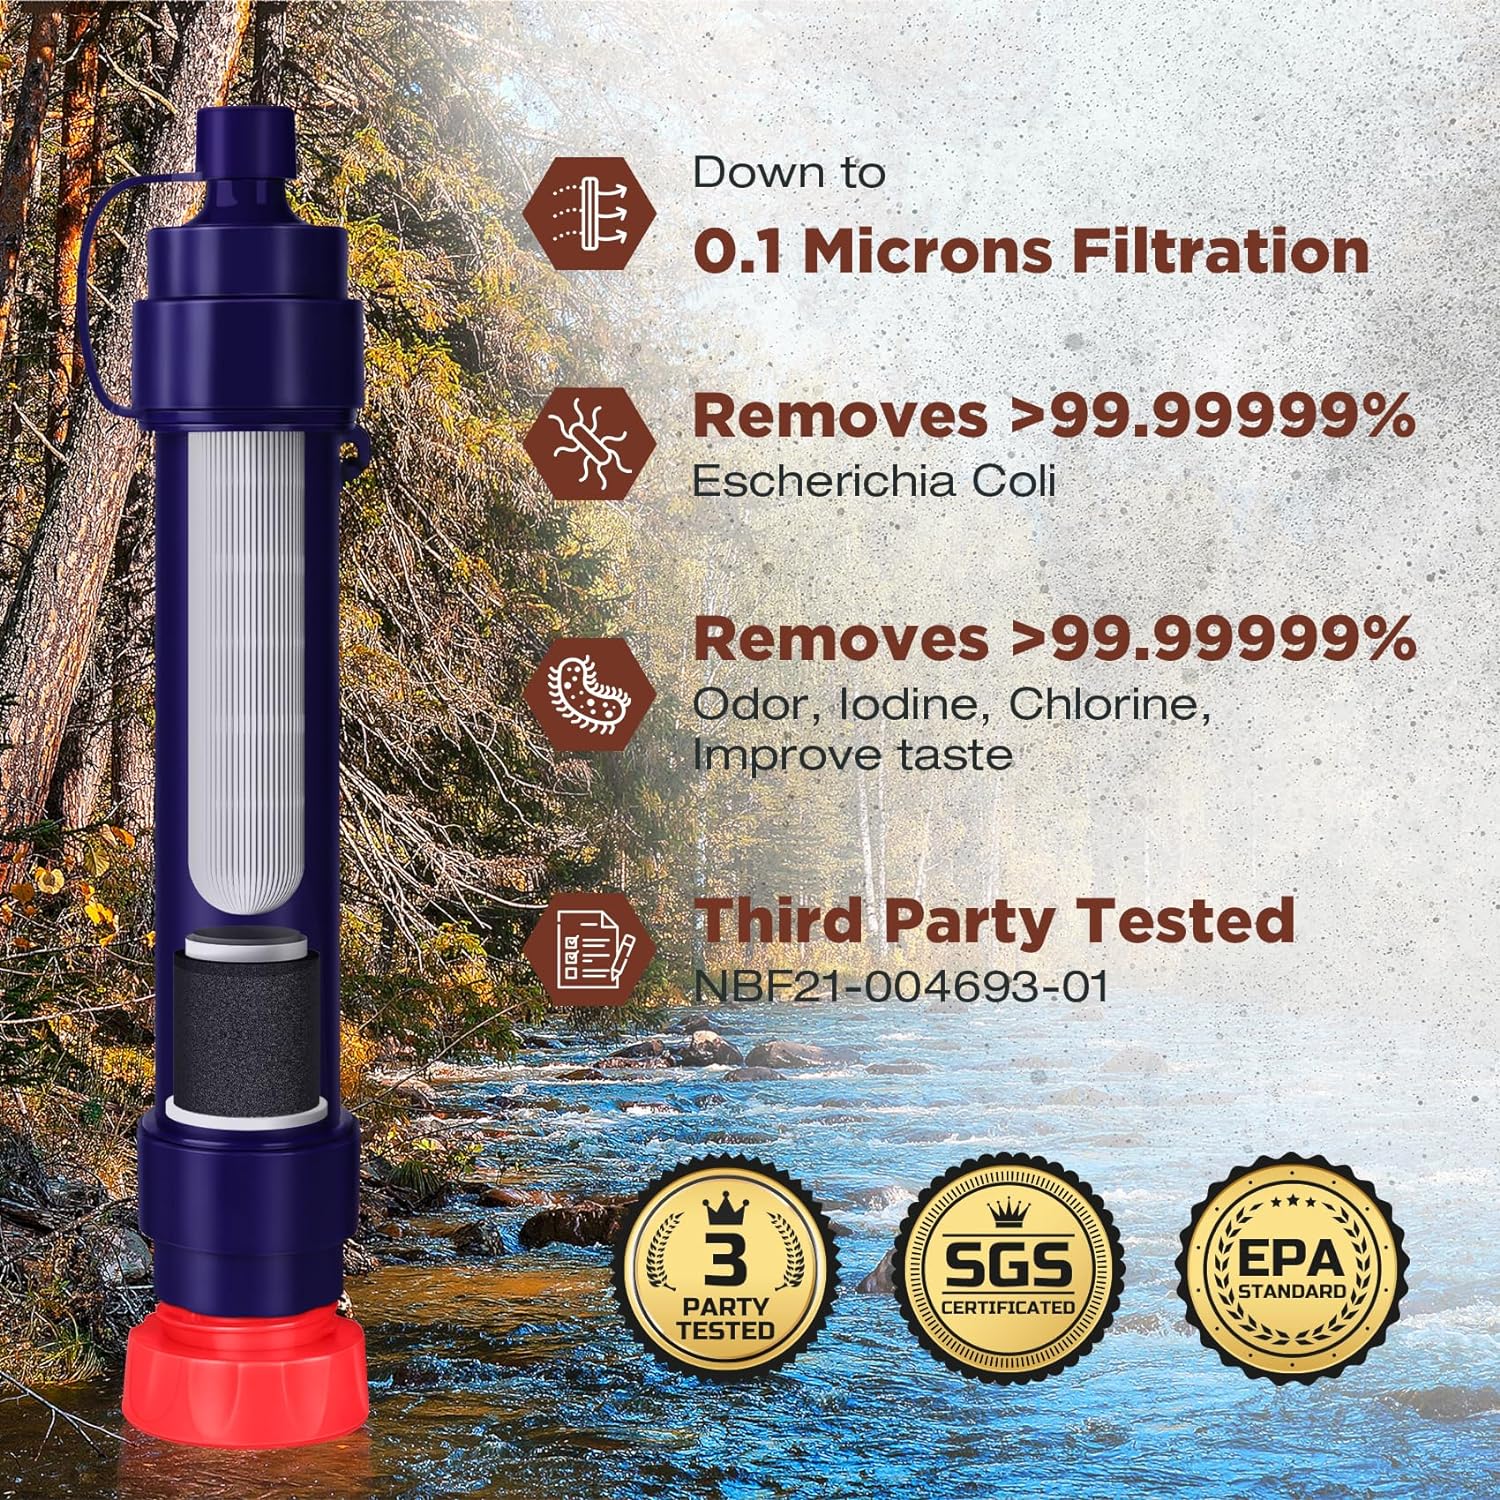 Water Filter Straw WS02, Detachable 4-Stage 0.1-Micron Portable Water Filter Camping, 5,000L Water Purifier Survival Gear and Equipment for Hiking Camping Travel and Emergency